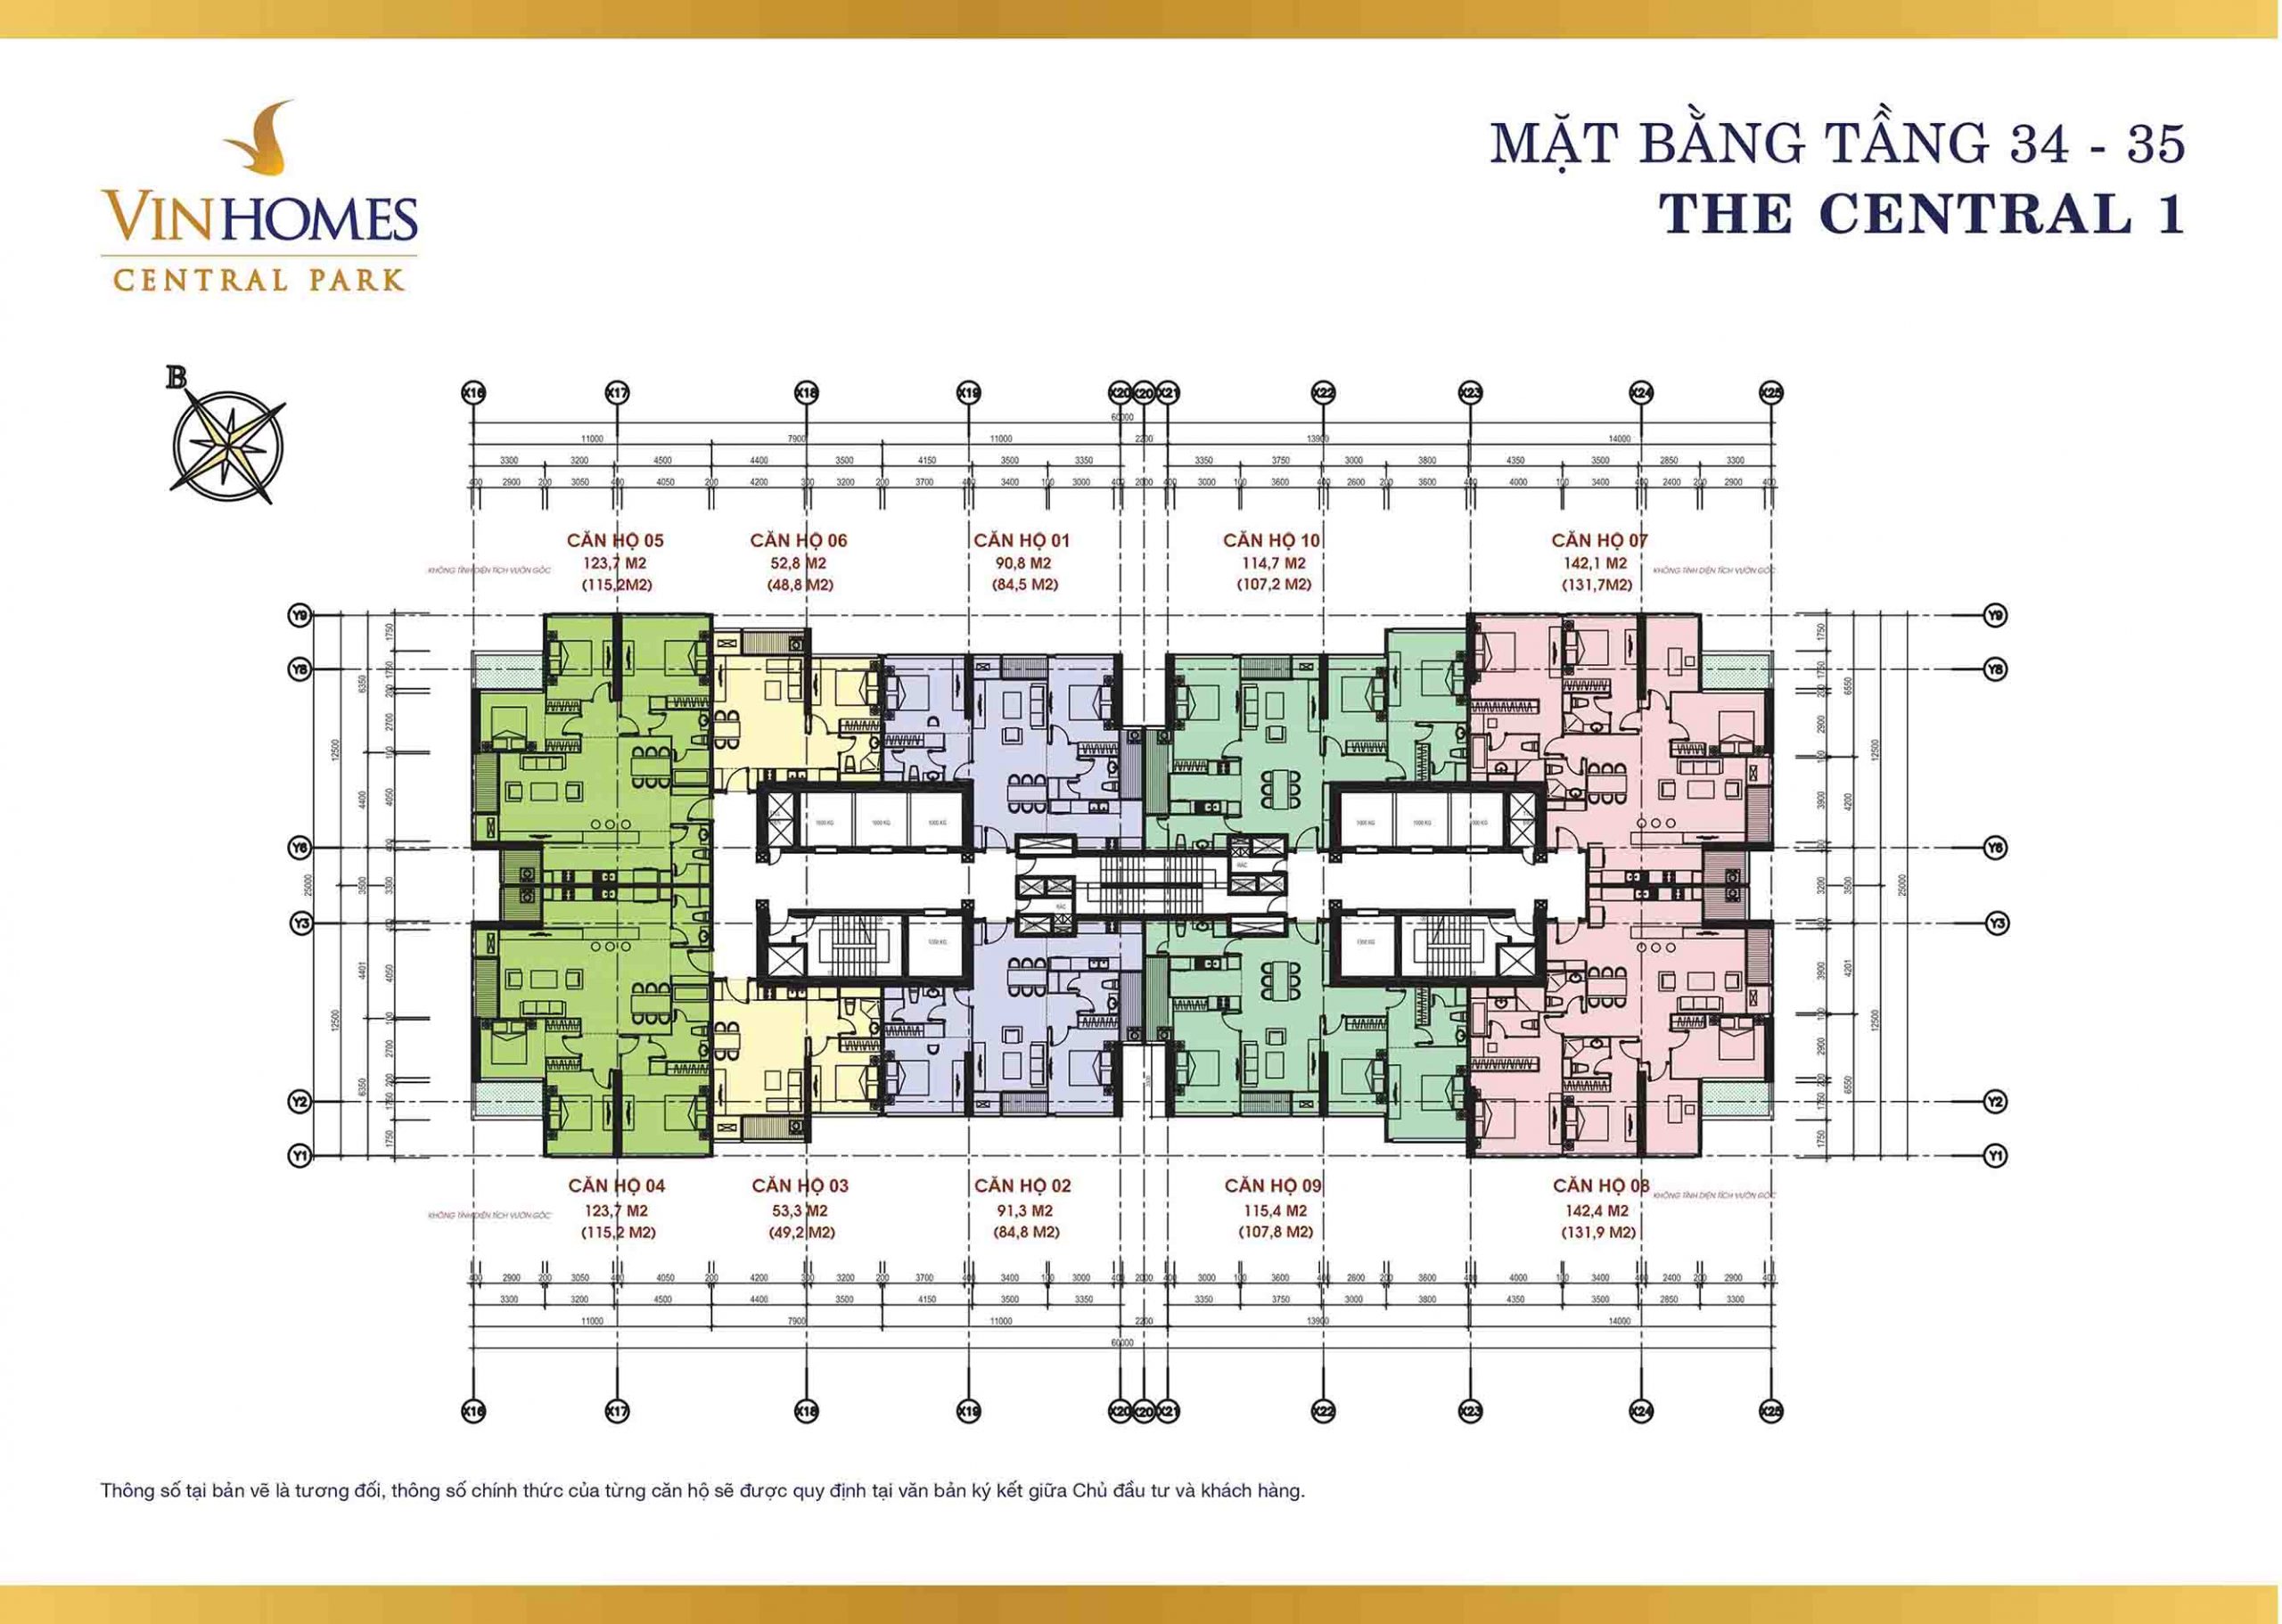 Layout mặt bằng tầng 34-35 tòa Central 1